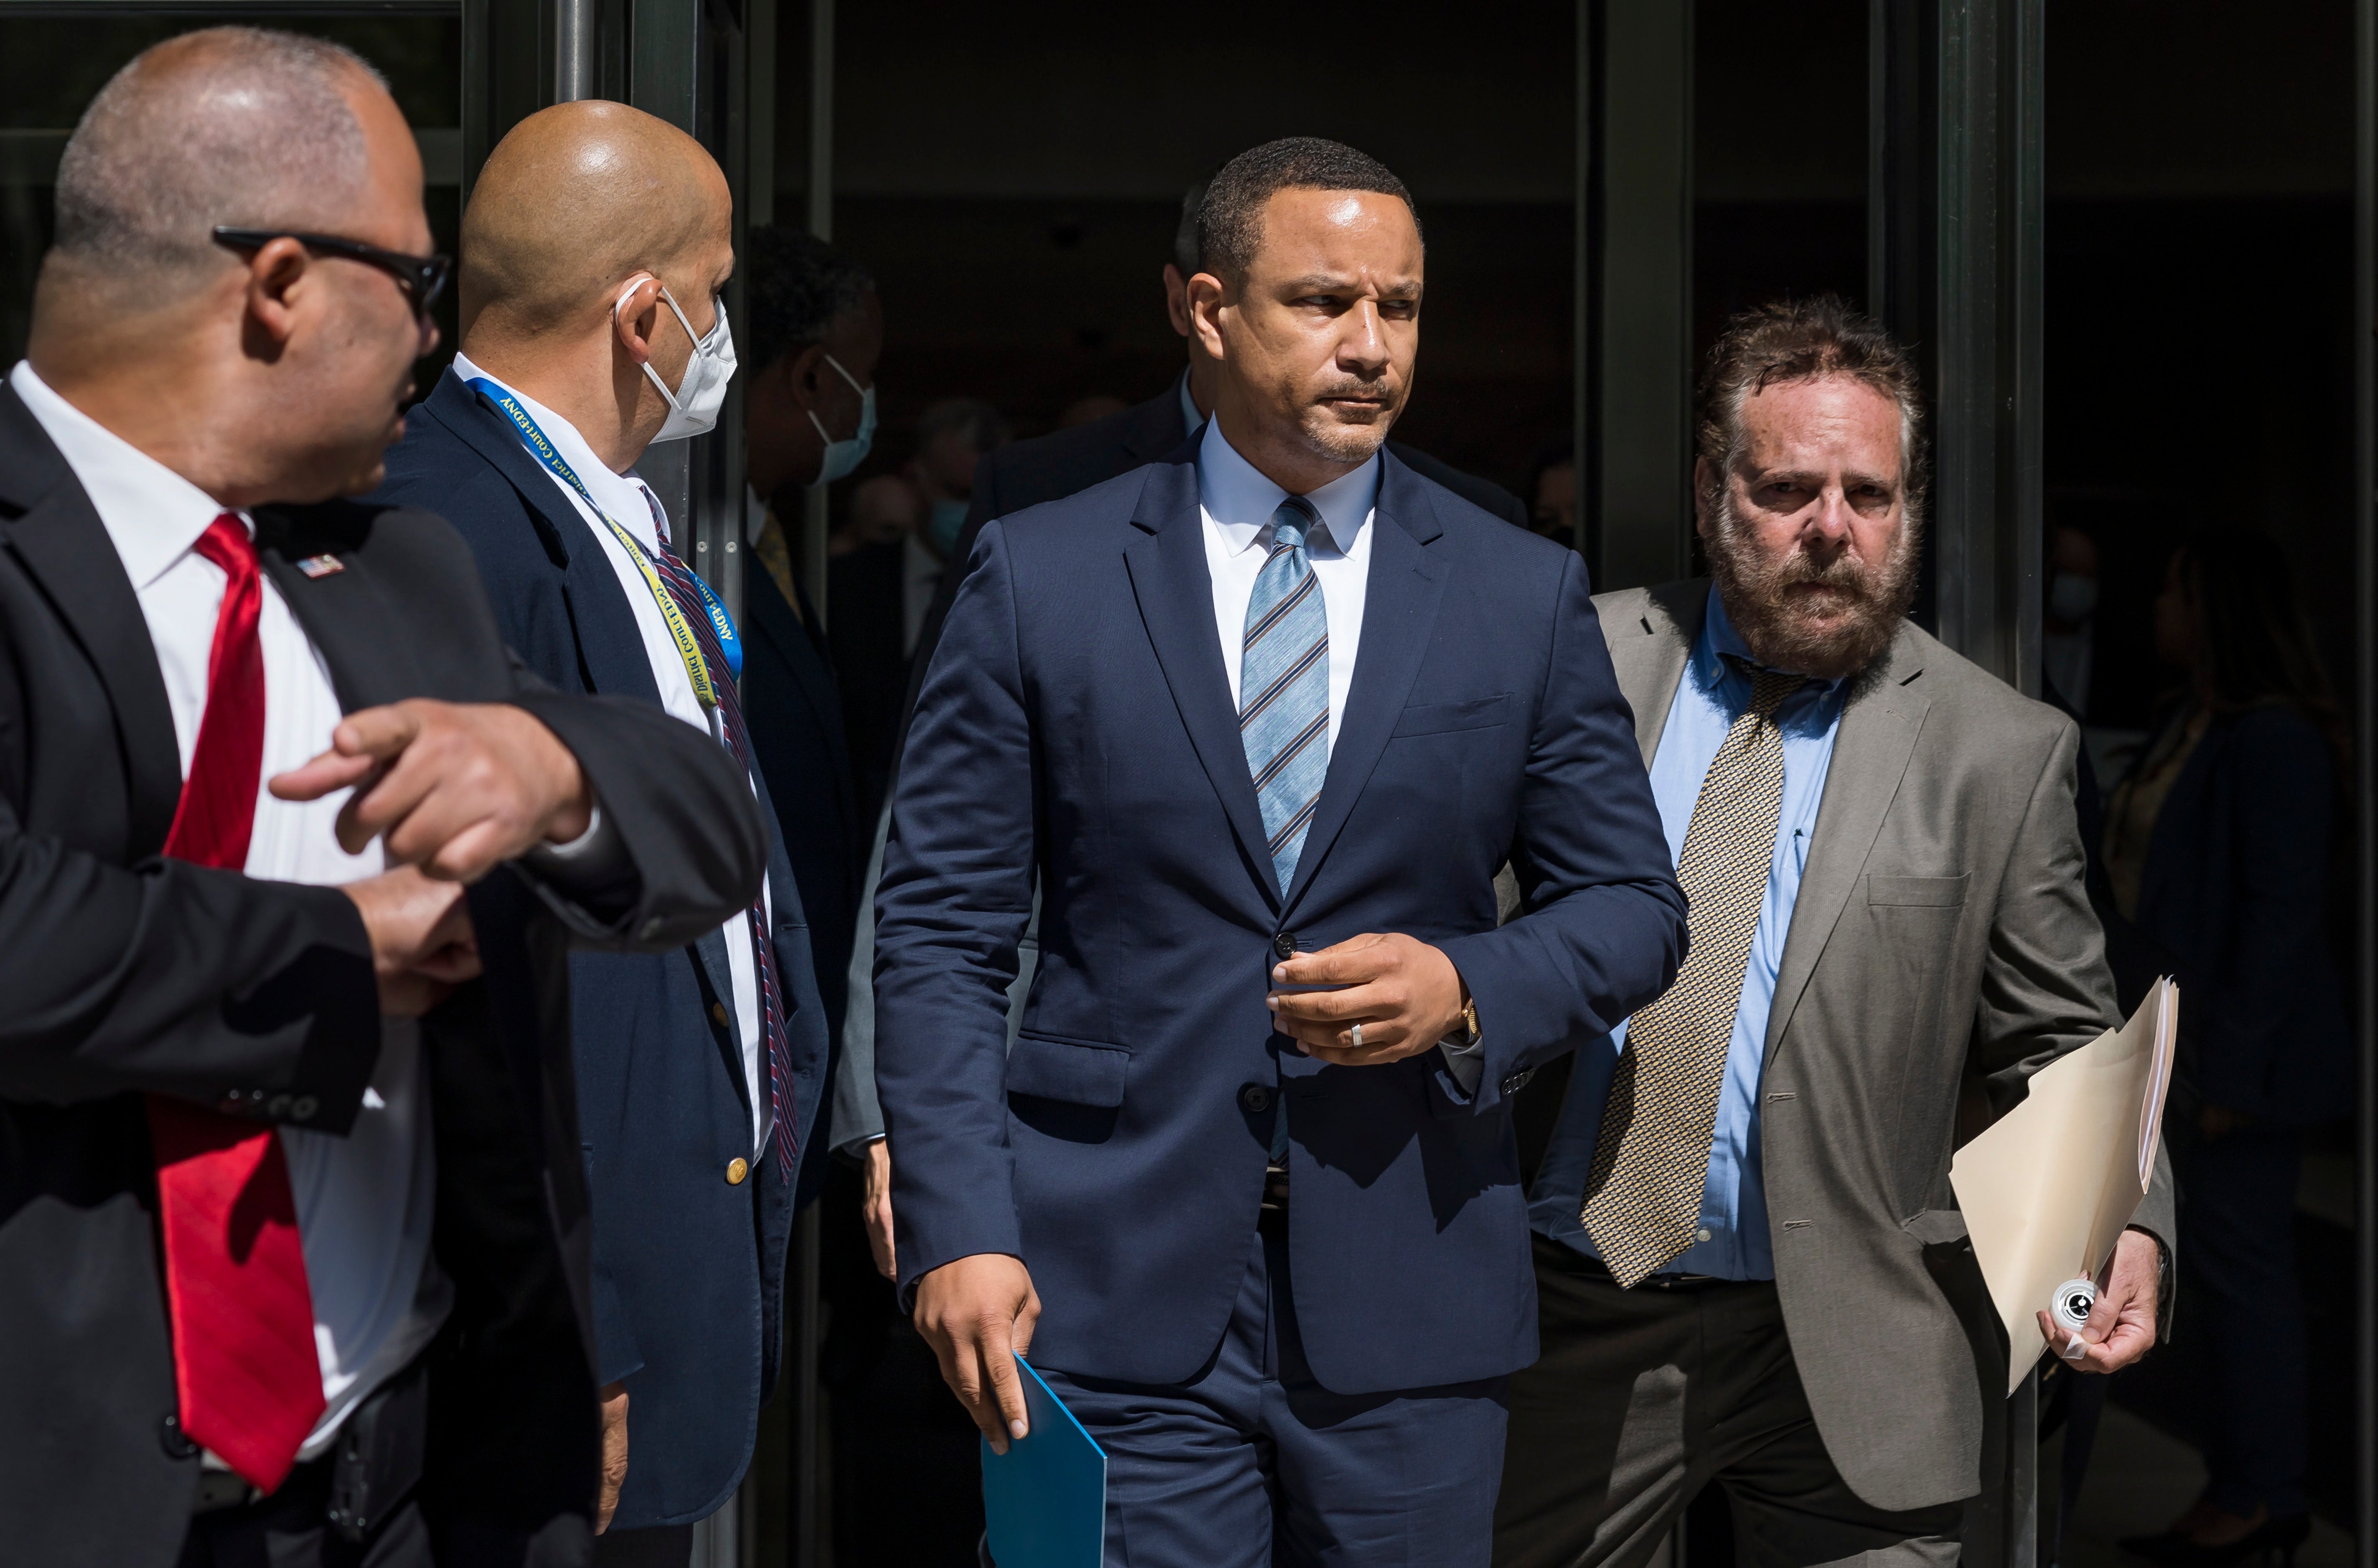 Breon Peace (C), the United States Attorney for the Eastern District of New York, walks to a press conference outside of the United States Courthouse after former R&B singer R. Kelly was sentenced to 30 years in prison after his conviction last year on federal racketeering and sex trafficking charges in the Brooklyn borough of New York, New York, USA, 29 June 2022.